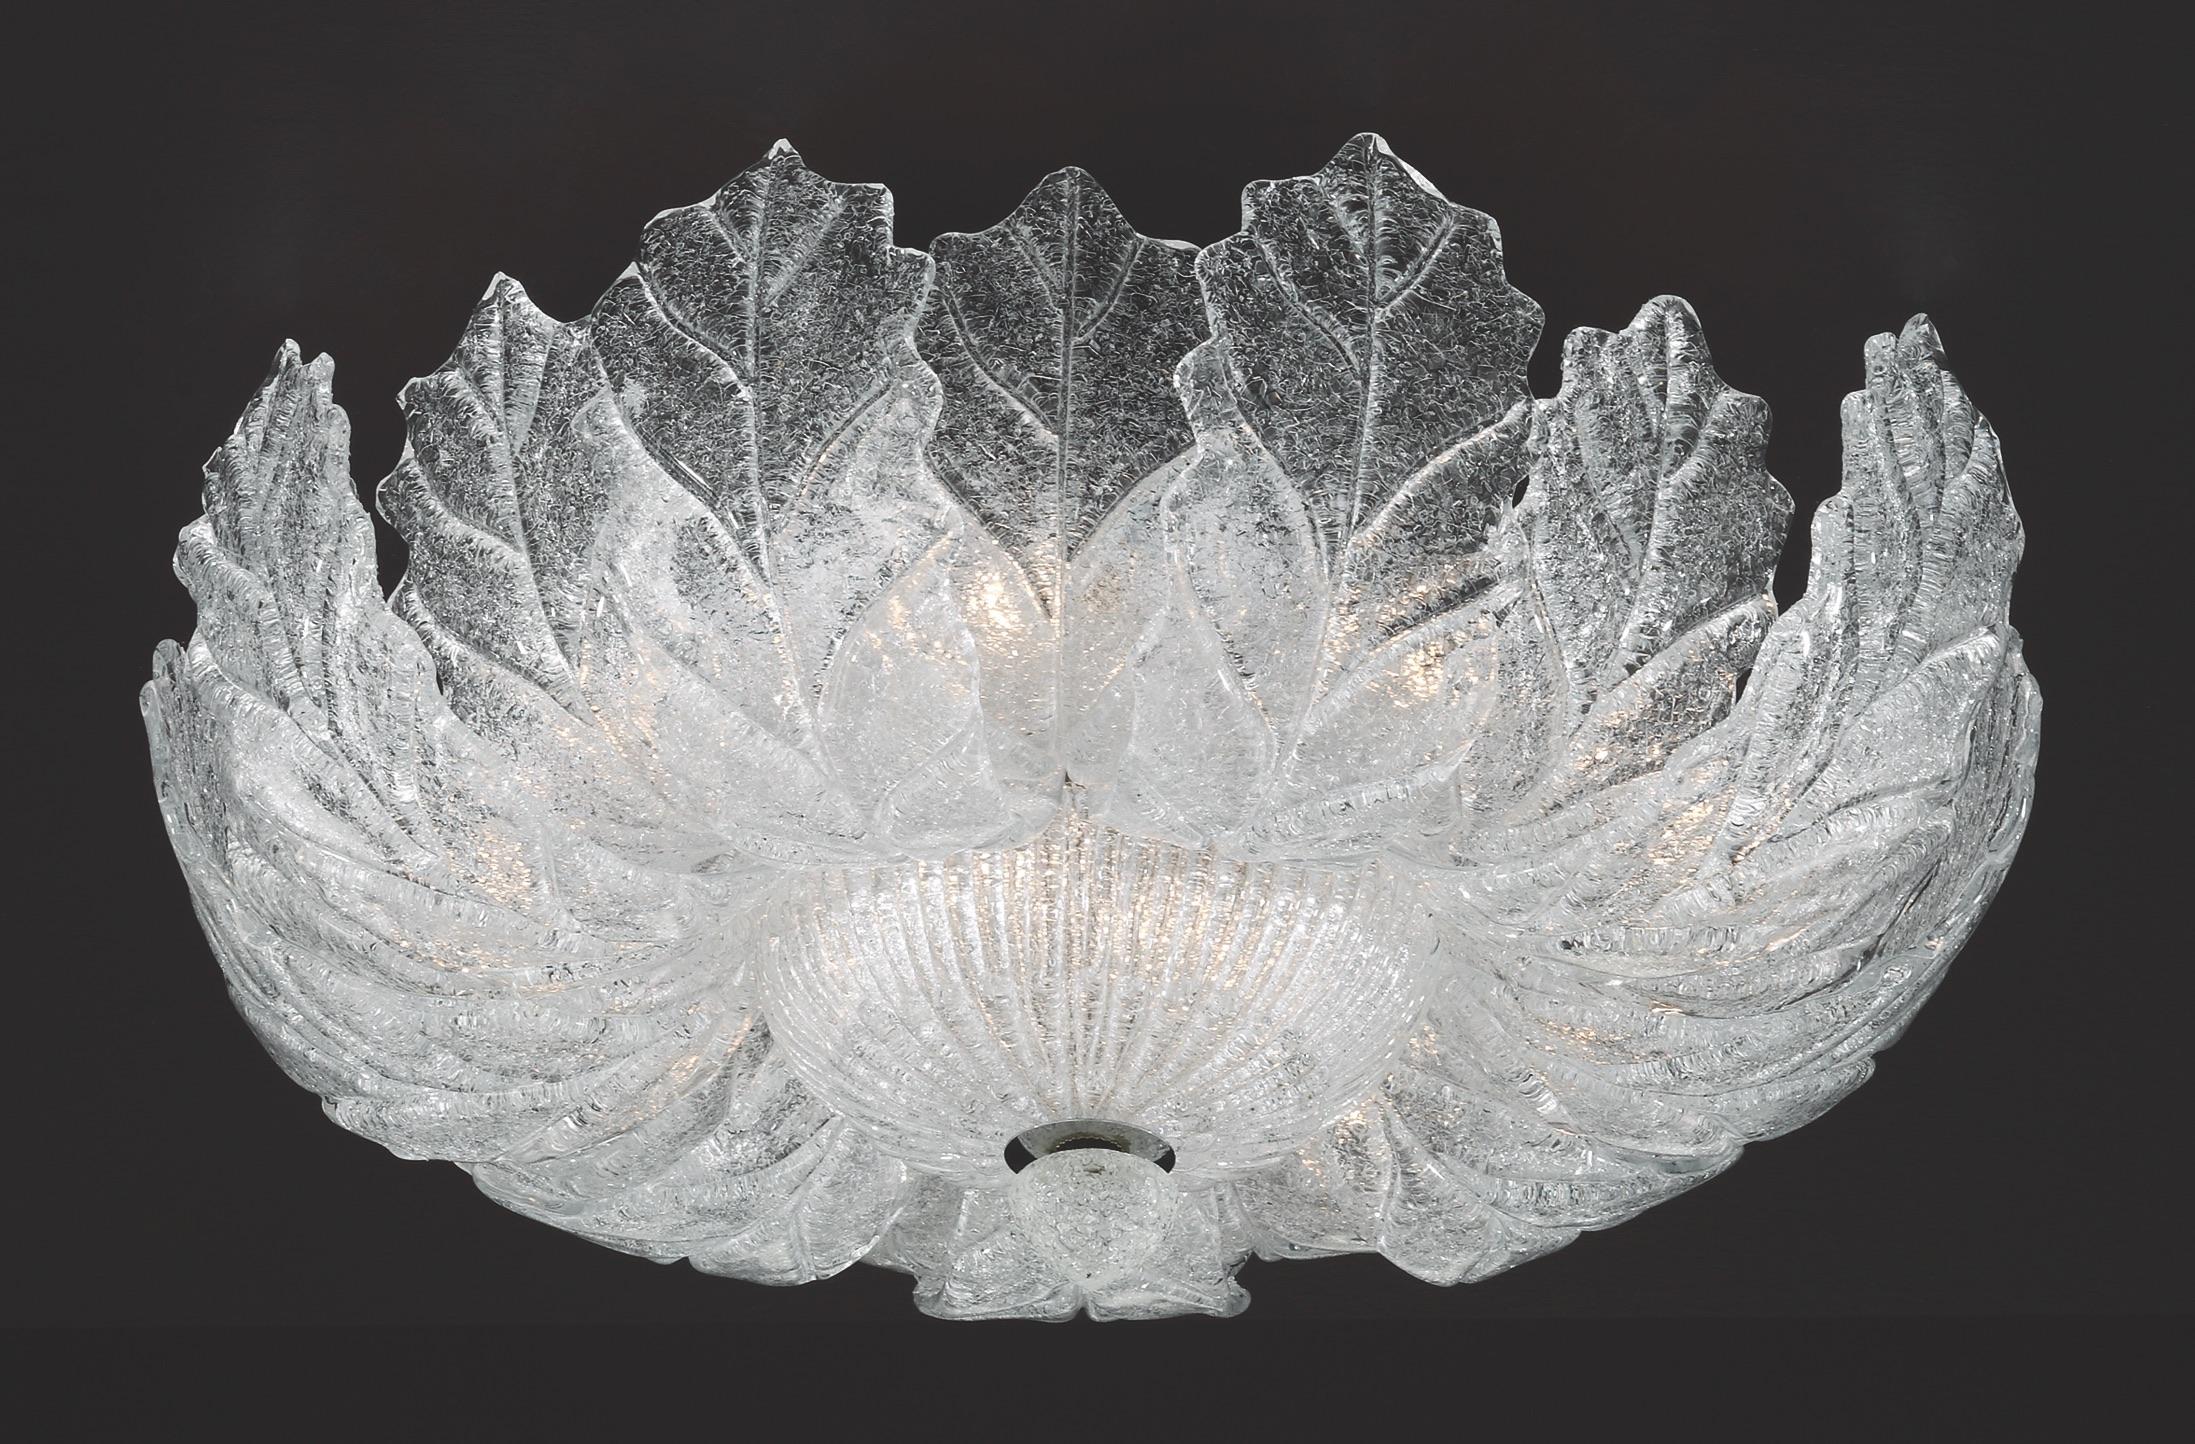 Italian flush mount with clear Murano glass leaves hand blown in Graniglia technique to produce a granular textured effect, mounted on white metal frame by Fabio Ltd / Made in Italy
11 lights / E12 or E14 type / max 40W each
Measures: Diameter 23.5